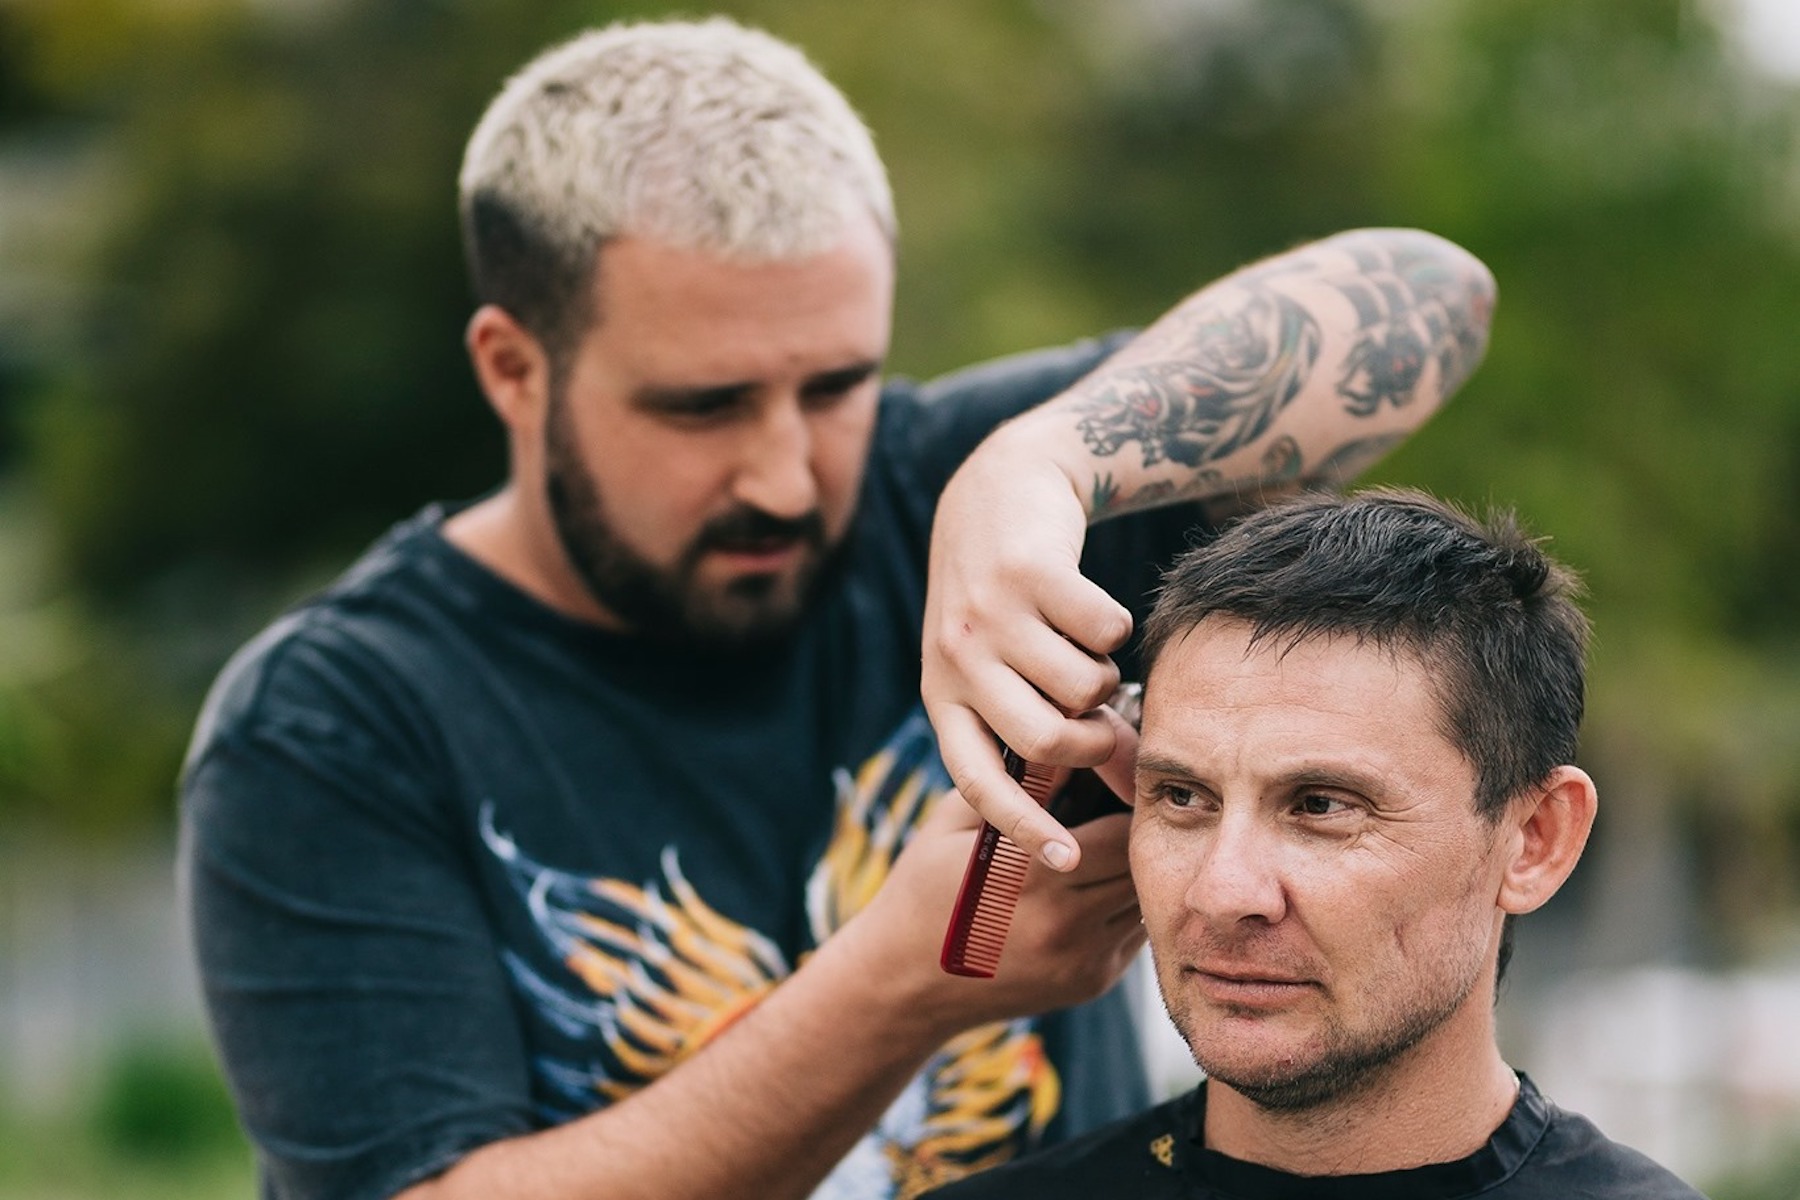 Australian Barbers Get Crafty With Haircut Loophole